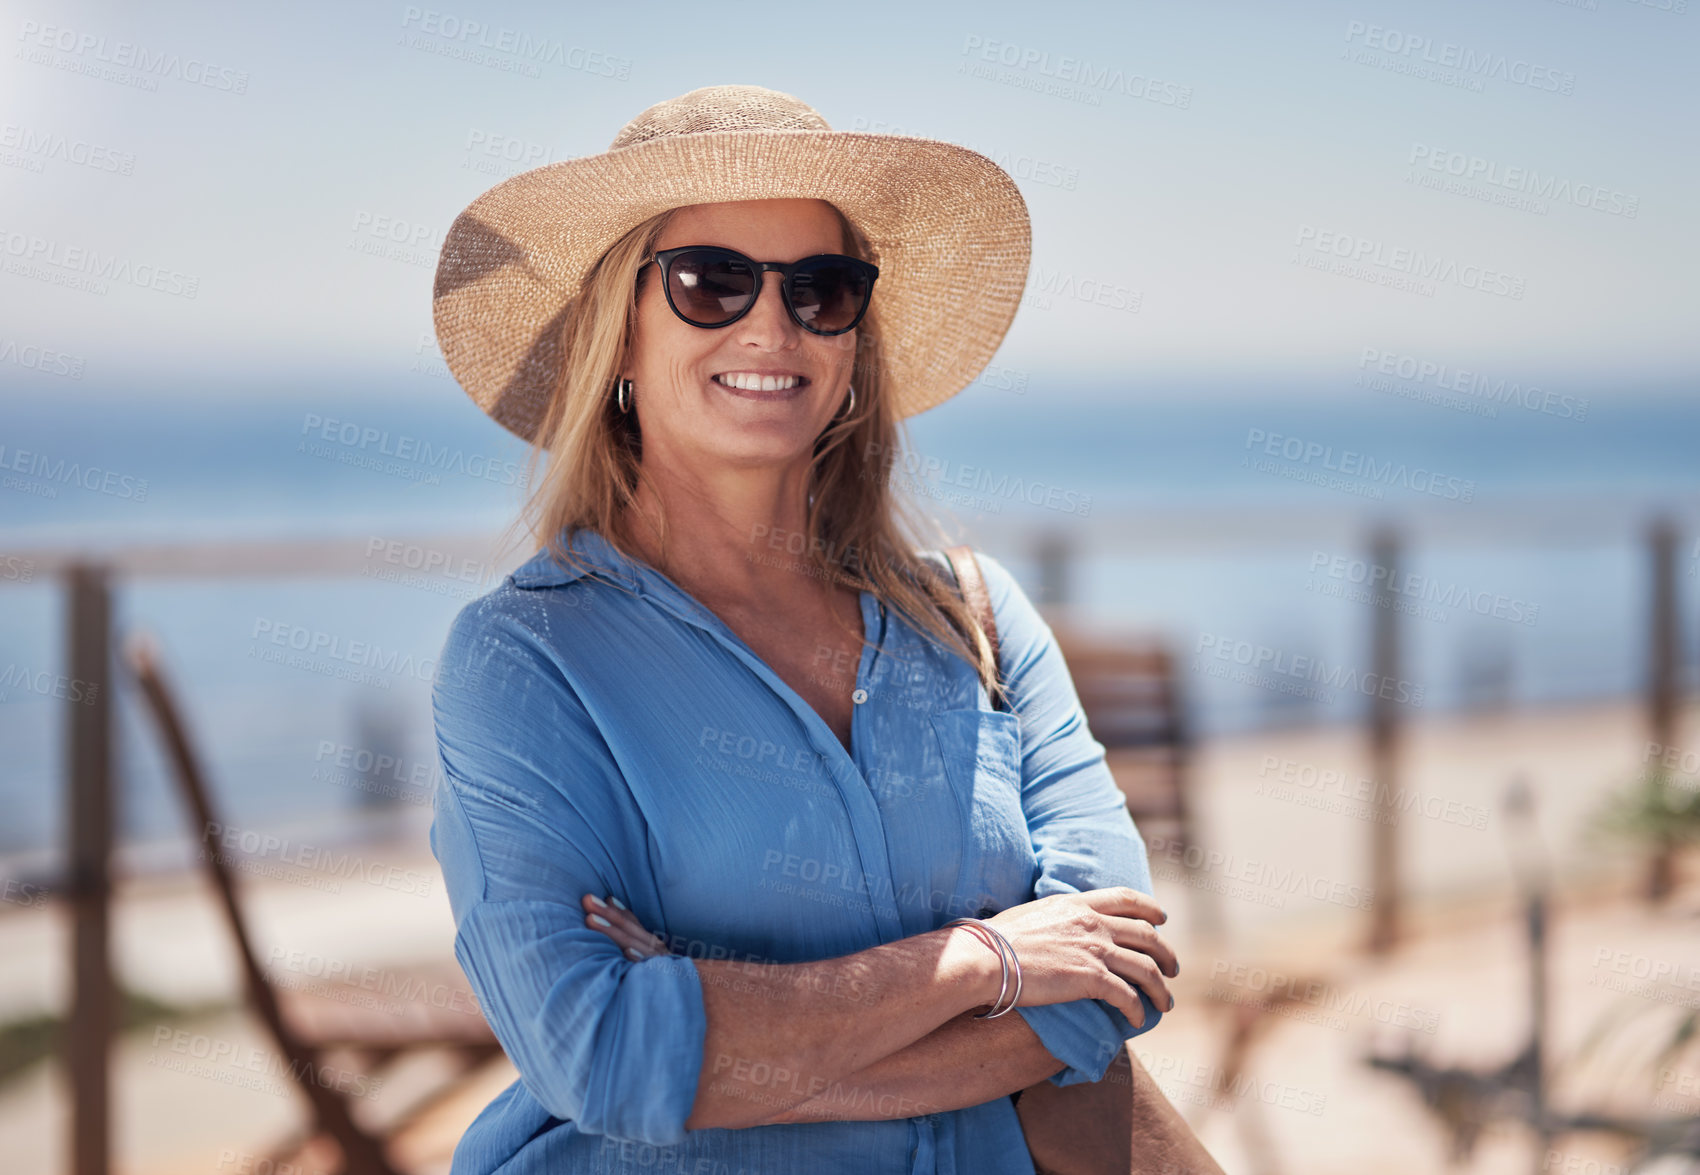 Buy stock photo Portrait of a cheerful middle aged woman smiling brightly while standing outside on a beach promenade during the day